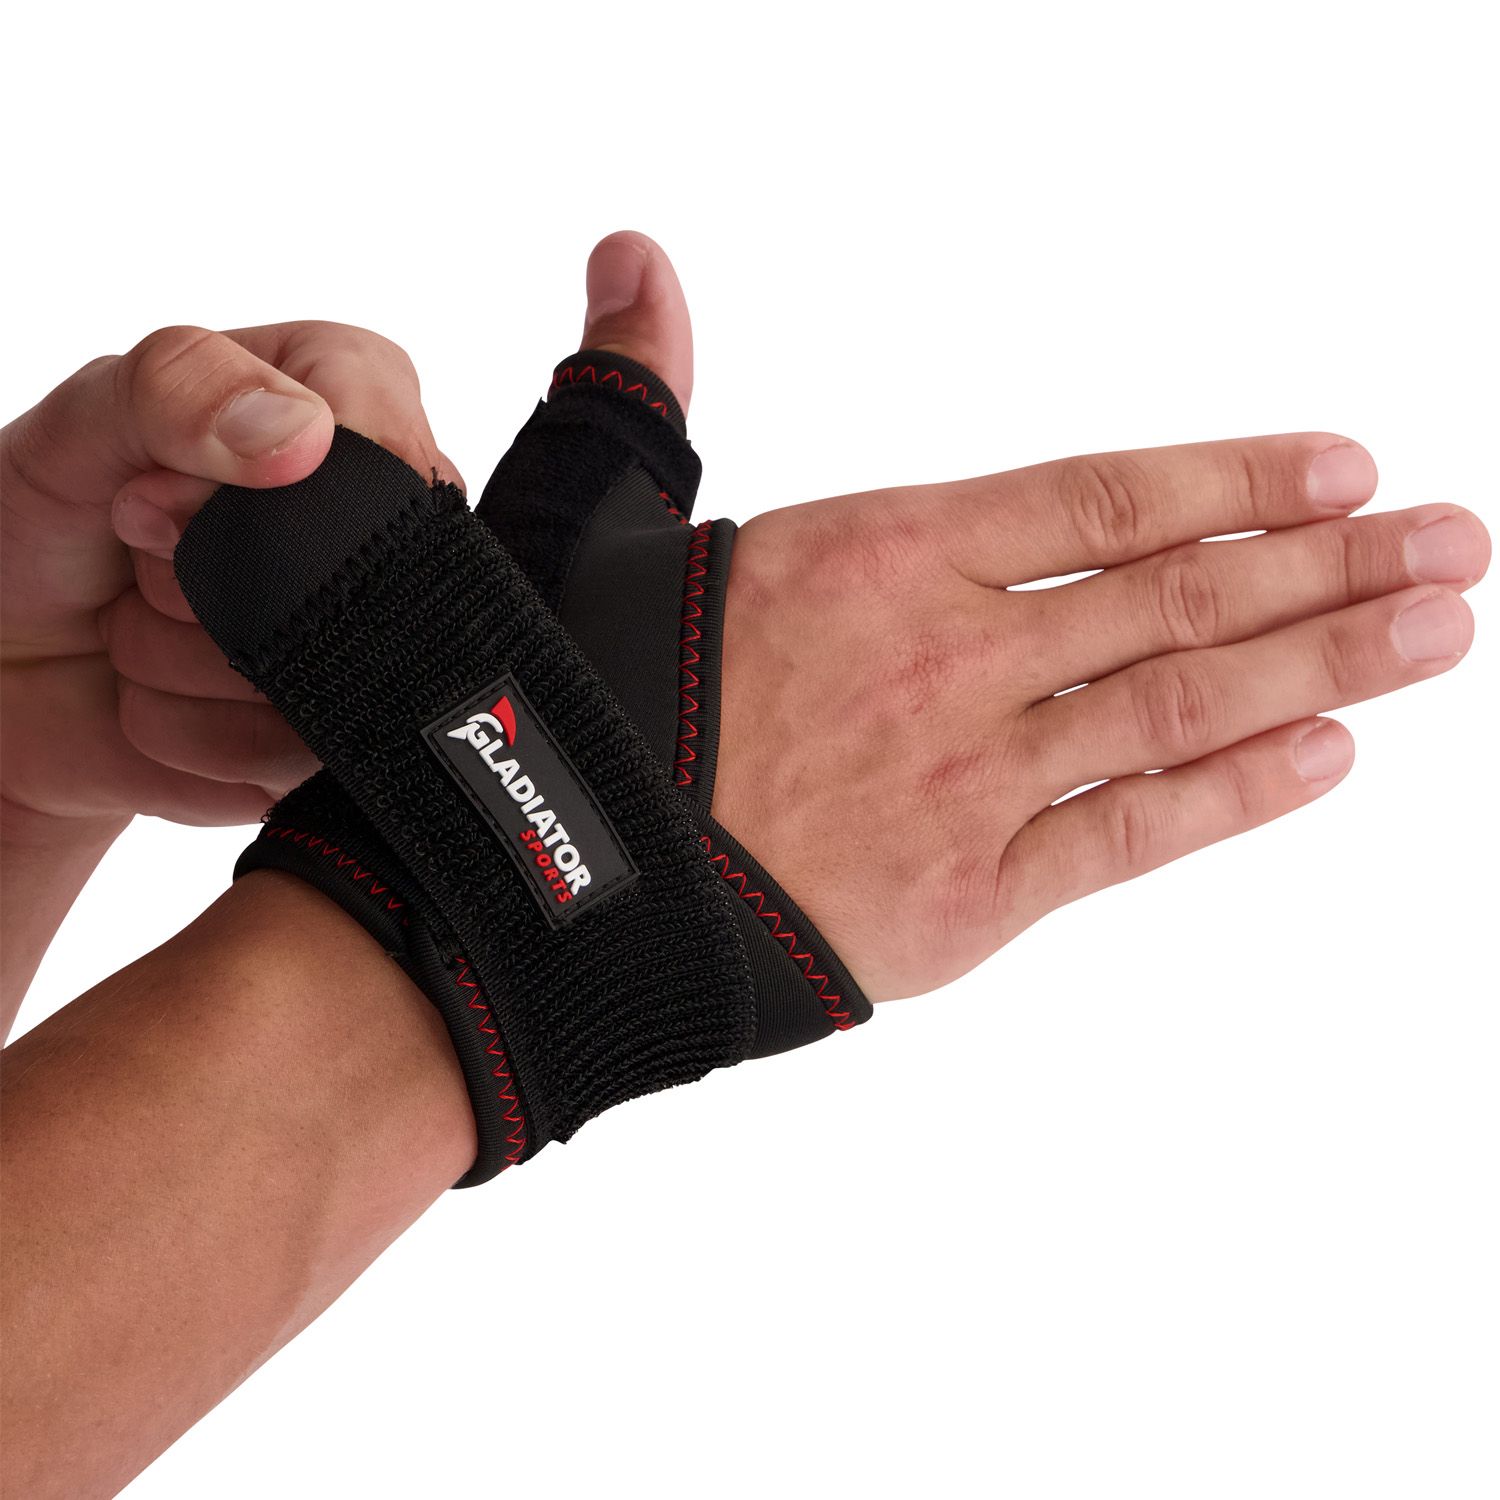 gladiator sports thumb wrist support for sale